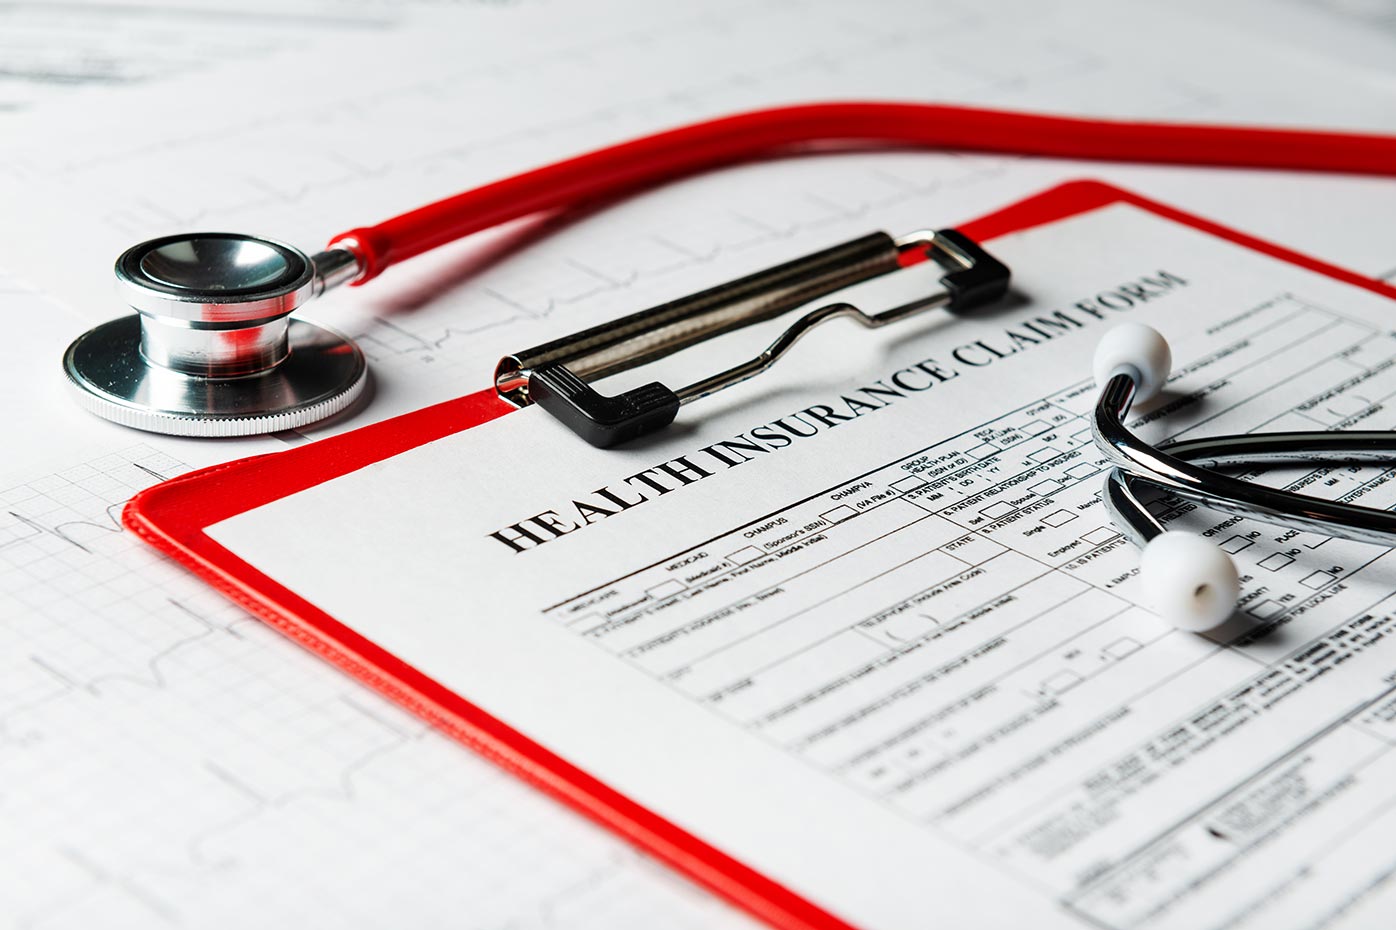 Stethoscope resting on clipboard with health insurance claim form